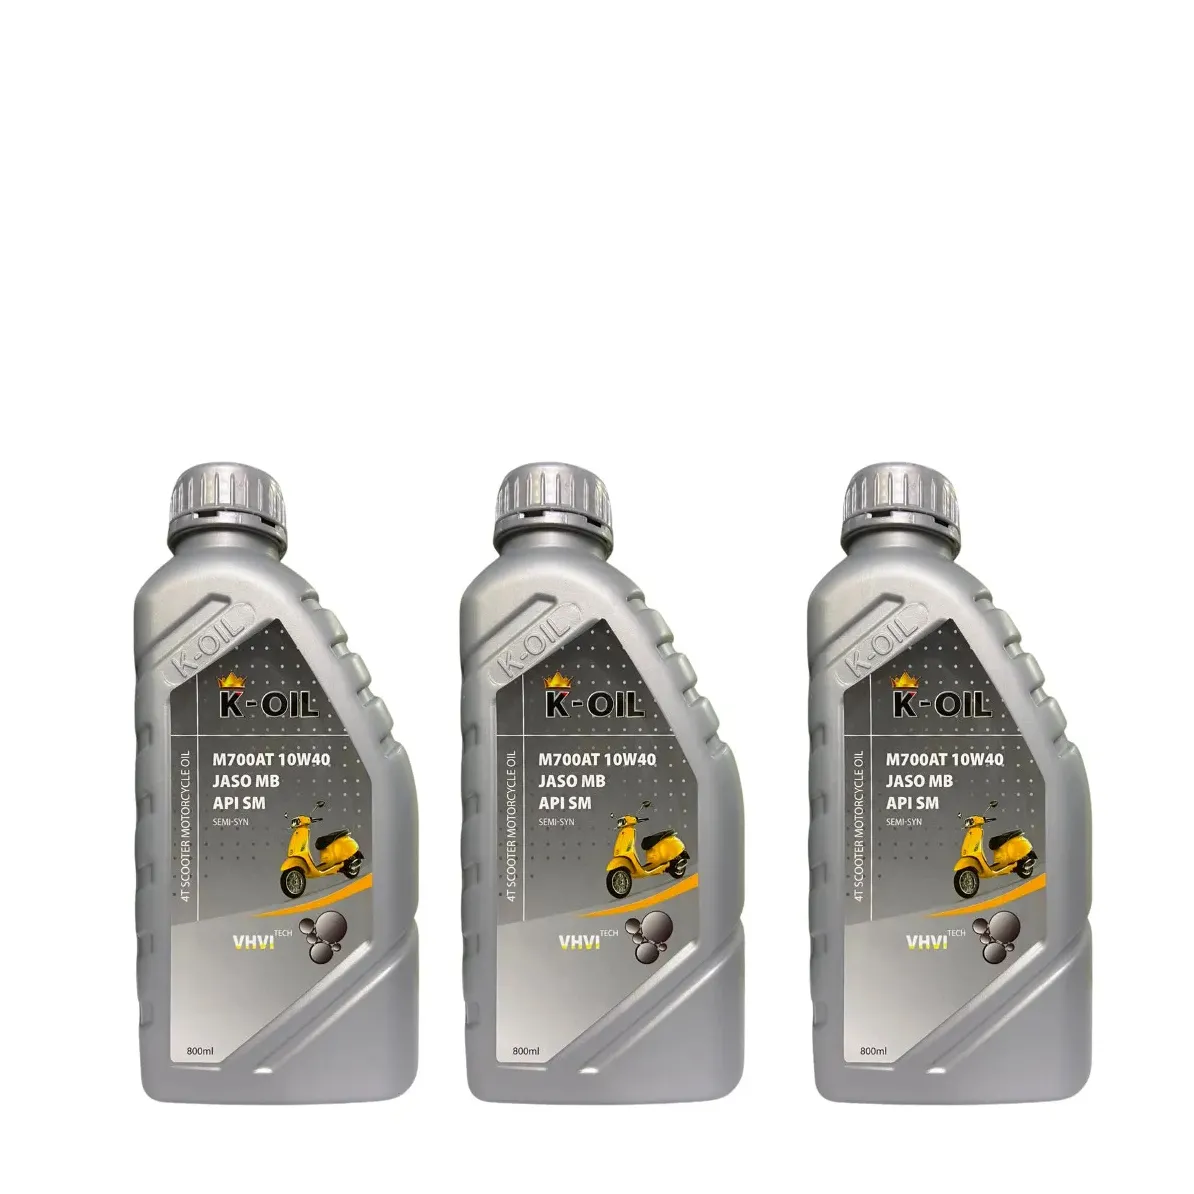 Vietnam K-OIL M700AT JASO MB API SM 10W40, high viscosity index and cheap price motorcycle oil, wholesaler price